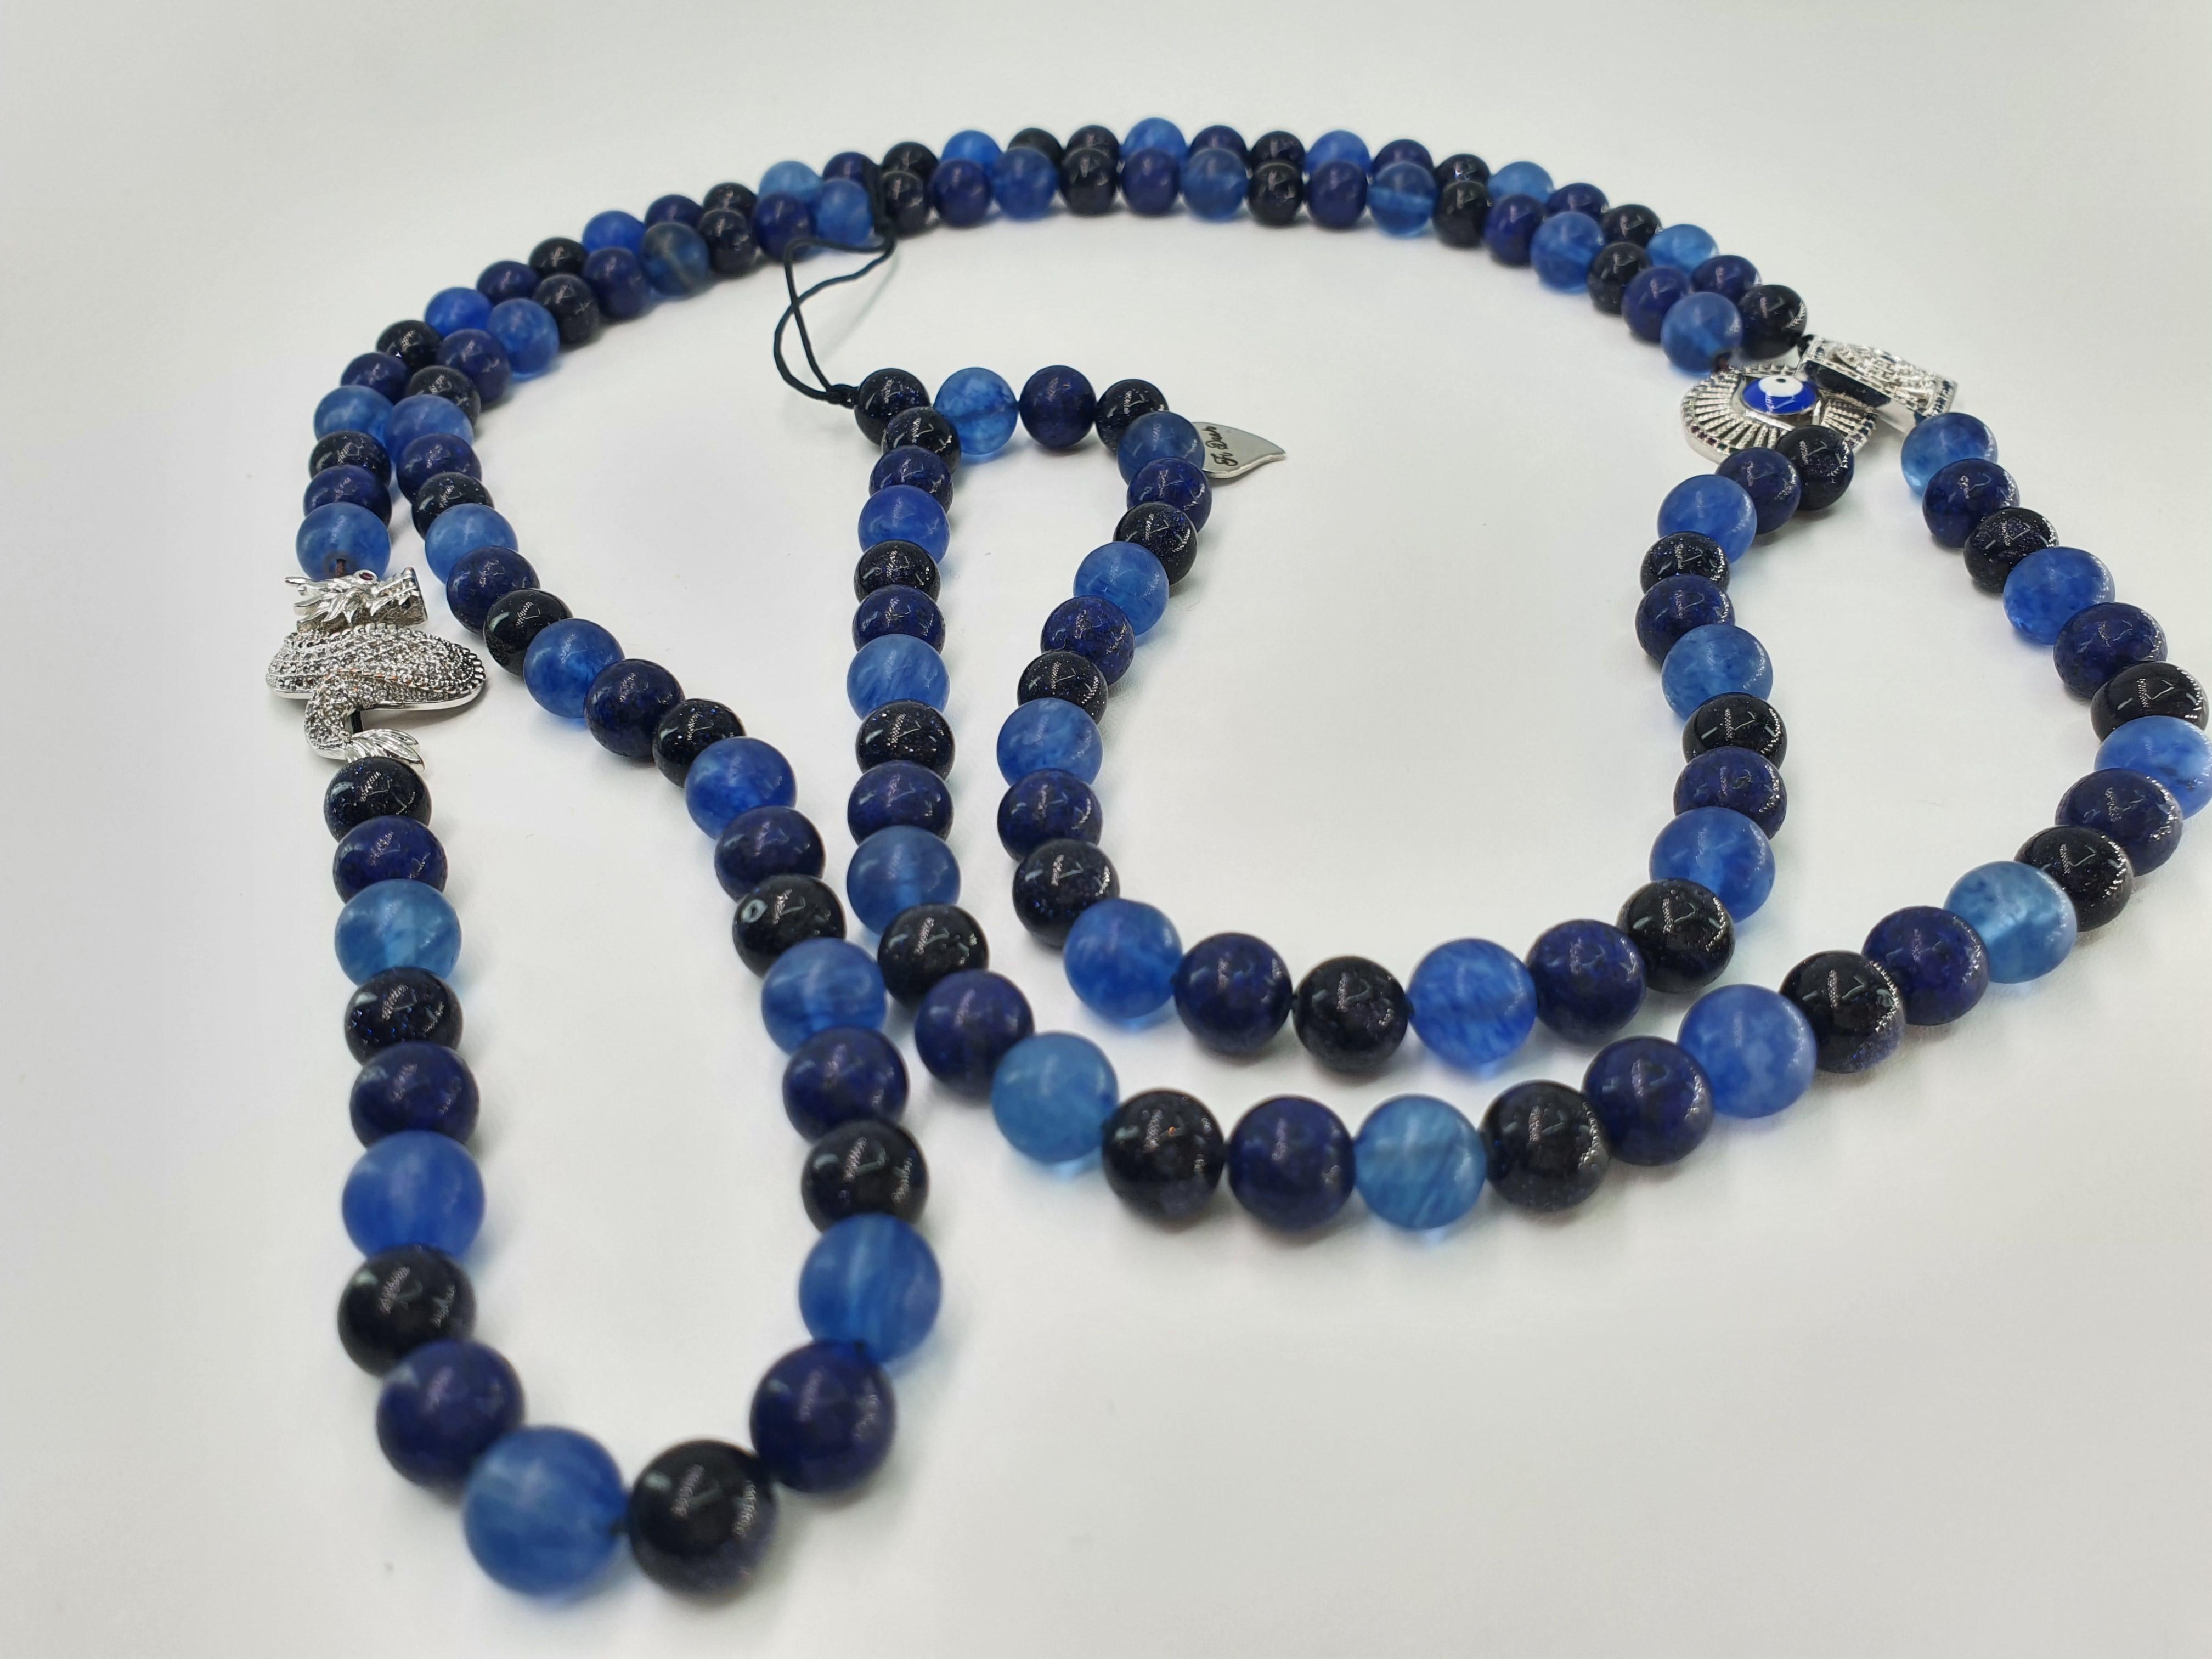 This beautiful fashion blue sand stone, lapis lazuli and watermelon blue beads with 3charms: dragon, square evil eye and rainbow evil eye can be used as an accessory for a phone, hand bag, like a necklace or body accessory.
The strap is carefully